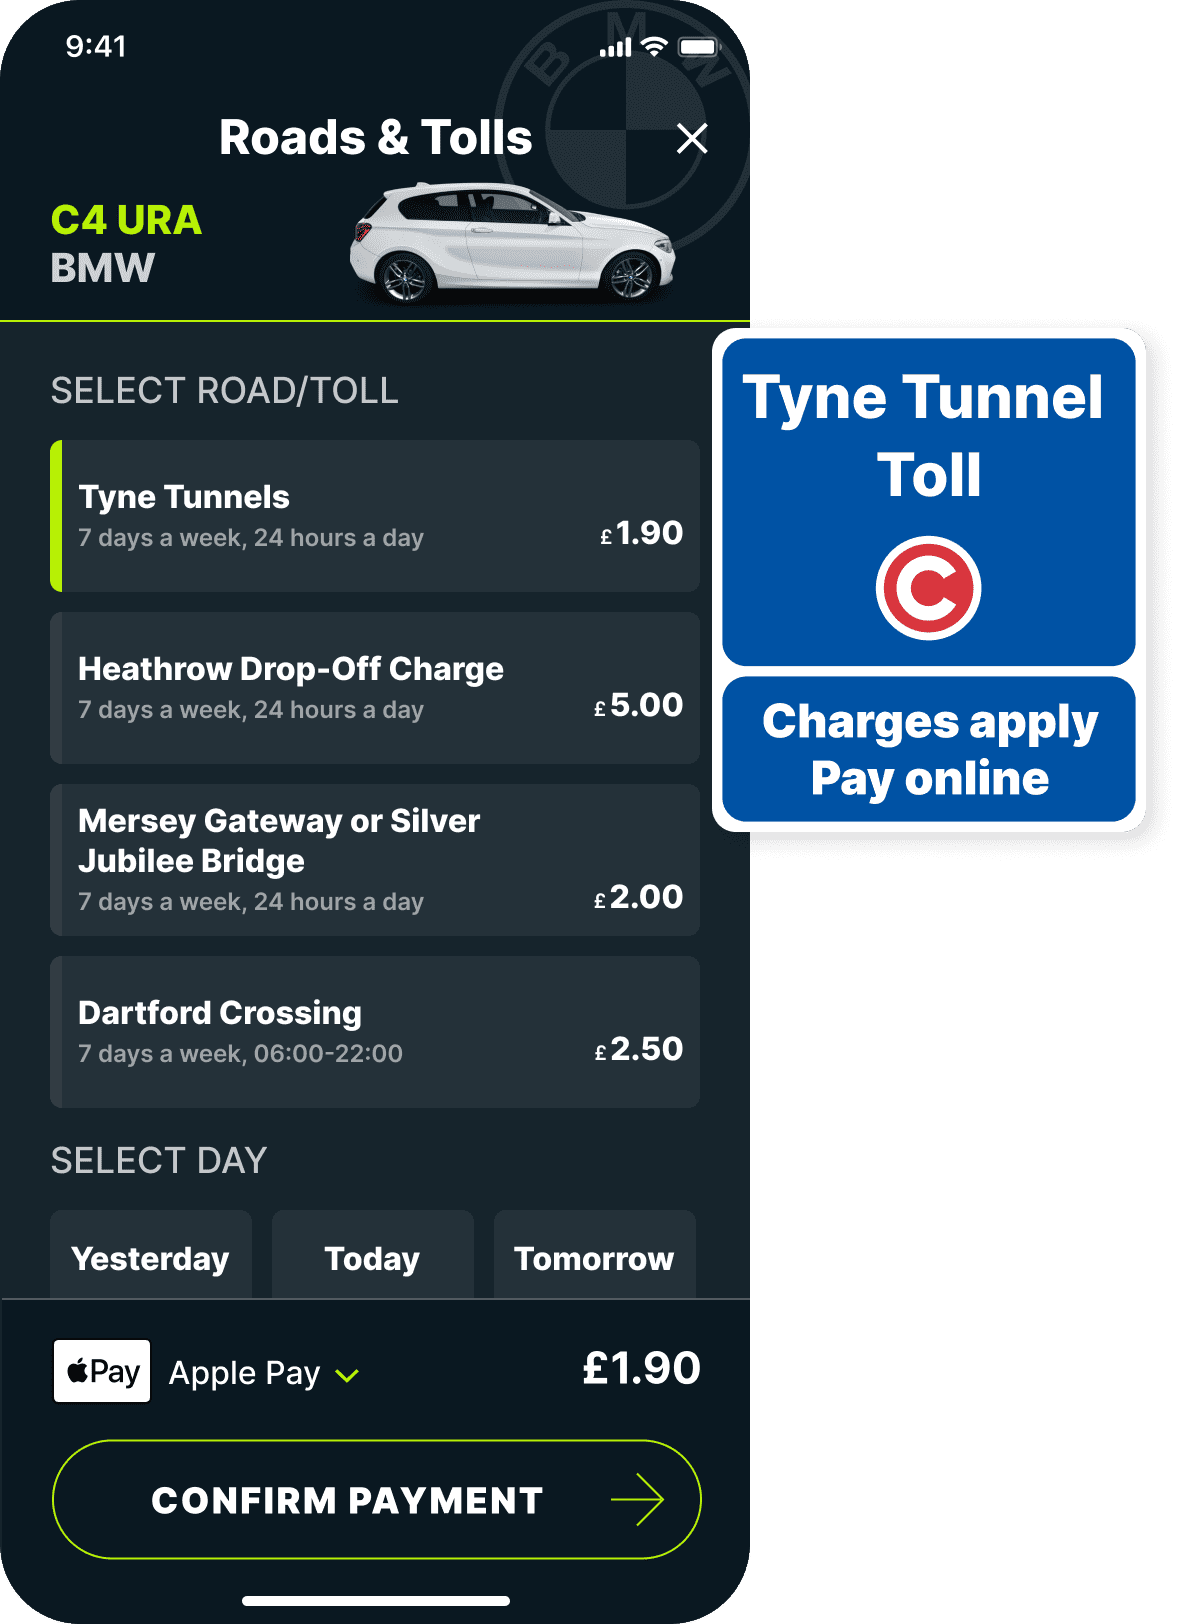 Caura payment screen for Tyne Tunnels with the road sign